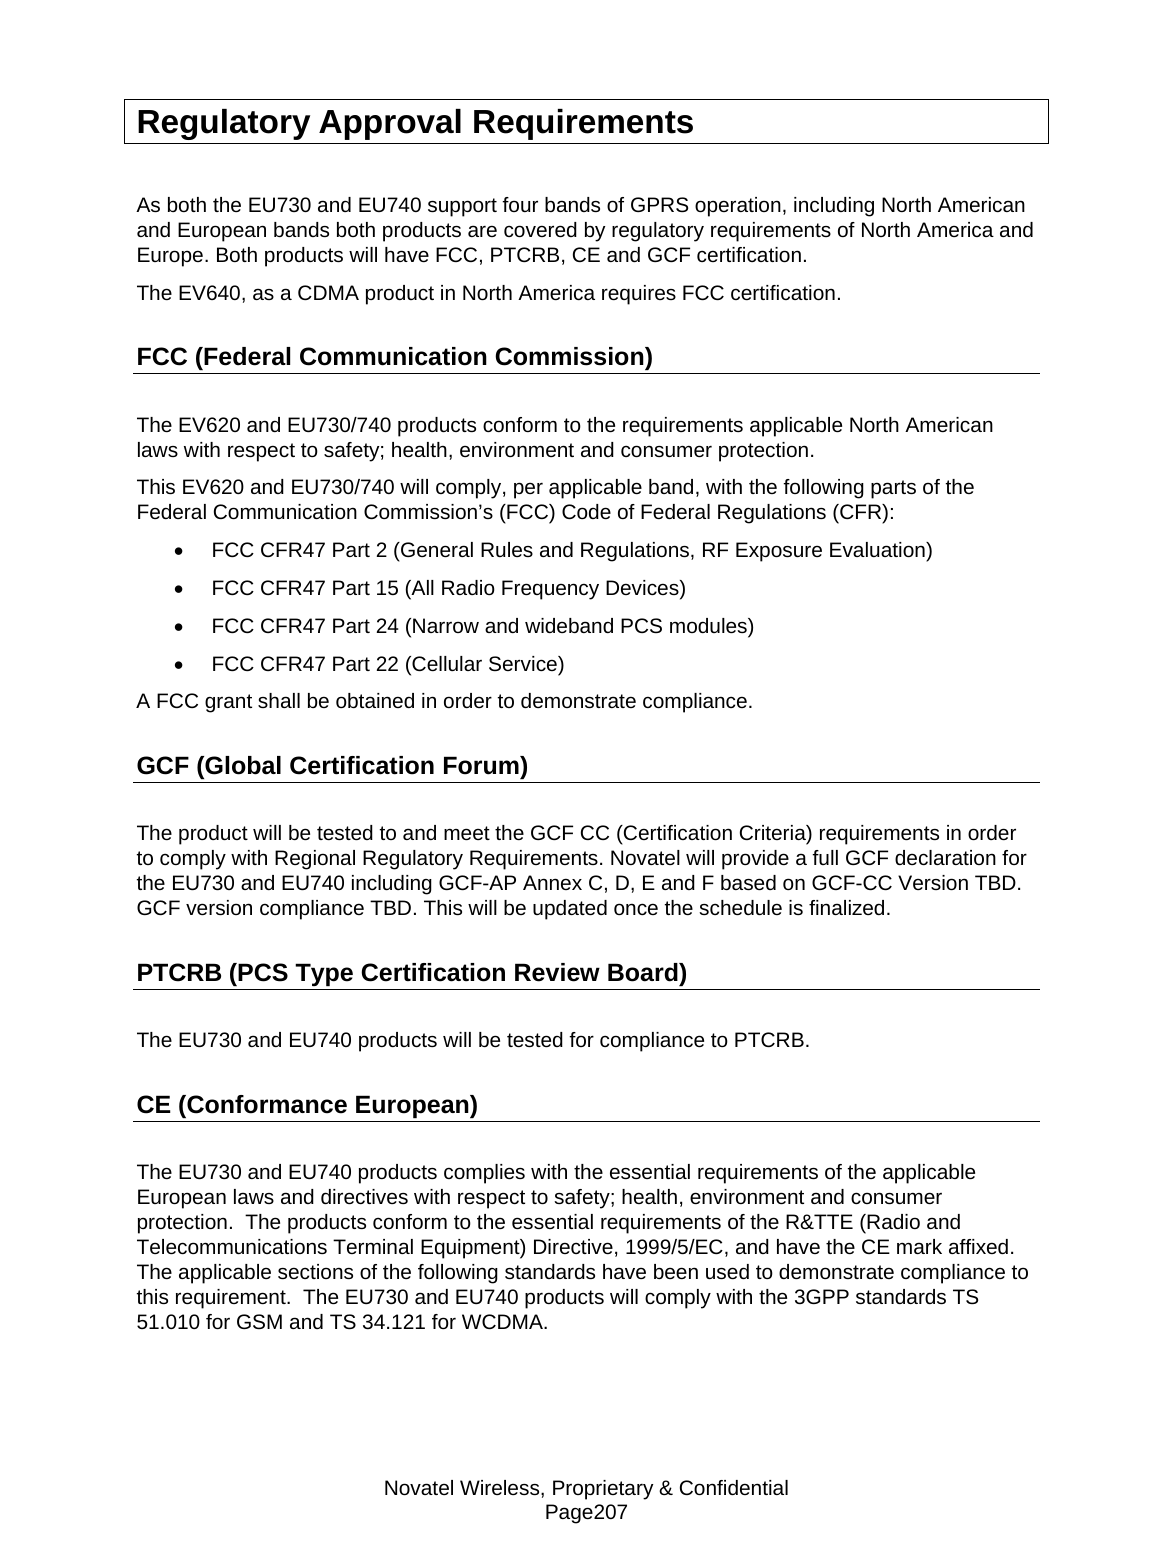 Novatel Wireless, Proprietary &amp; Confidential Page207 Regulatory Approval Requirements  As both the EU730 and EU740 support four bands of GPRS operation, including North American and European bands both products are covered by regulatory requirements of North America and Europe. Both products will have FCC, PTCRB, CE and GCF certification. The EV640, as a CDMA product in North America requires FCC certification. FCC (Federal Communication Commission) The EV620 and EU730/740 products conform to the requirements applicable North American laws with respect to safety; health, environment and consumer protection.   This EV620 and EU730/740 will comply, per applicable band, with the following parts of the Federal Communication Commission’s (FCC) Code of Federal Regulations (CFR): •  FCC CFR47 Part 2 (General Rules and Regulations, RF Exposure Evaluation) •  FCC CFR47 Part 15 (All Radio Frequency Devices) •  FCC CFR47 Part 24 (Narrow and wideband PCS modules) •  FCC CFR47 Part 22 (Cellular Service) A FCC grant shall be obtained in order to demonstrate compliance. GCF (Global Certification Forum) The product will be tested to and meet the GCF CC (Certification Criteria) requirements in order to comply with Regional Regulatory Requirements. Novatel will provide a full GCF declaration for the EU730 and EU740 including GCF-AP Annex C, D, E and F based on GCF-CC Version TBD.  GCF version compliance TBD. This will be updated once the schedule is finalized. PTCRB (PCS Type Certification Review Board)  The EU730 and EU740 products will be tested for compliance to PTCRB. CE (Conformance European) The EU730 and EU740 products complies with the essential requirements of the applicable European laws and directives with respect to safety; health, environment and consumer protection.  The products conform to the essential requirements of the R&amp;TTE (Radio and Telecommunications Terminal Equipment) Directive, 1999/5/EC, and have the CE mark affixed.  The applicable sections of the following standards have been used to demonstrate compliance to this requirement.  The EU730 and EU740 products will comply with the 3GPP standards TS 51.010 for GSM and TS 34.121 for WCDMA. 